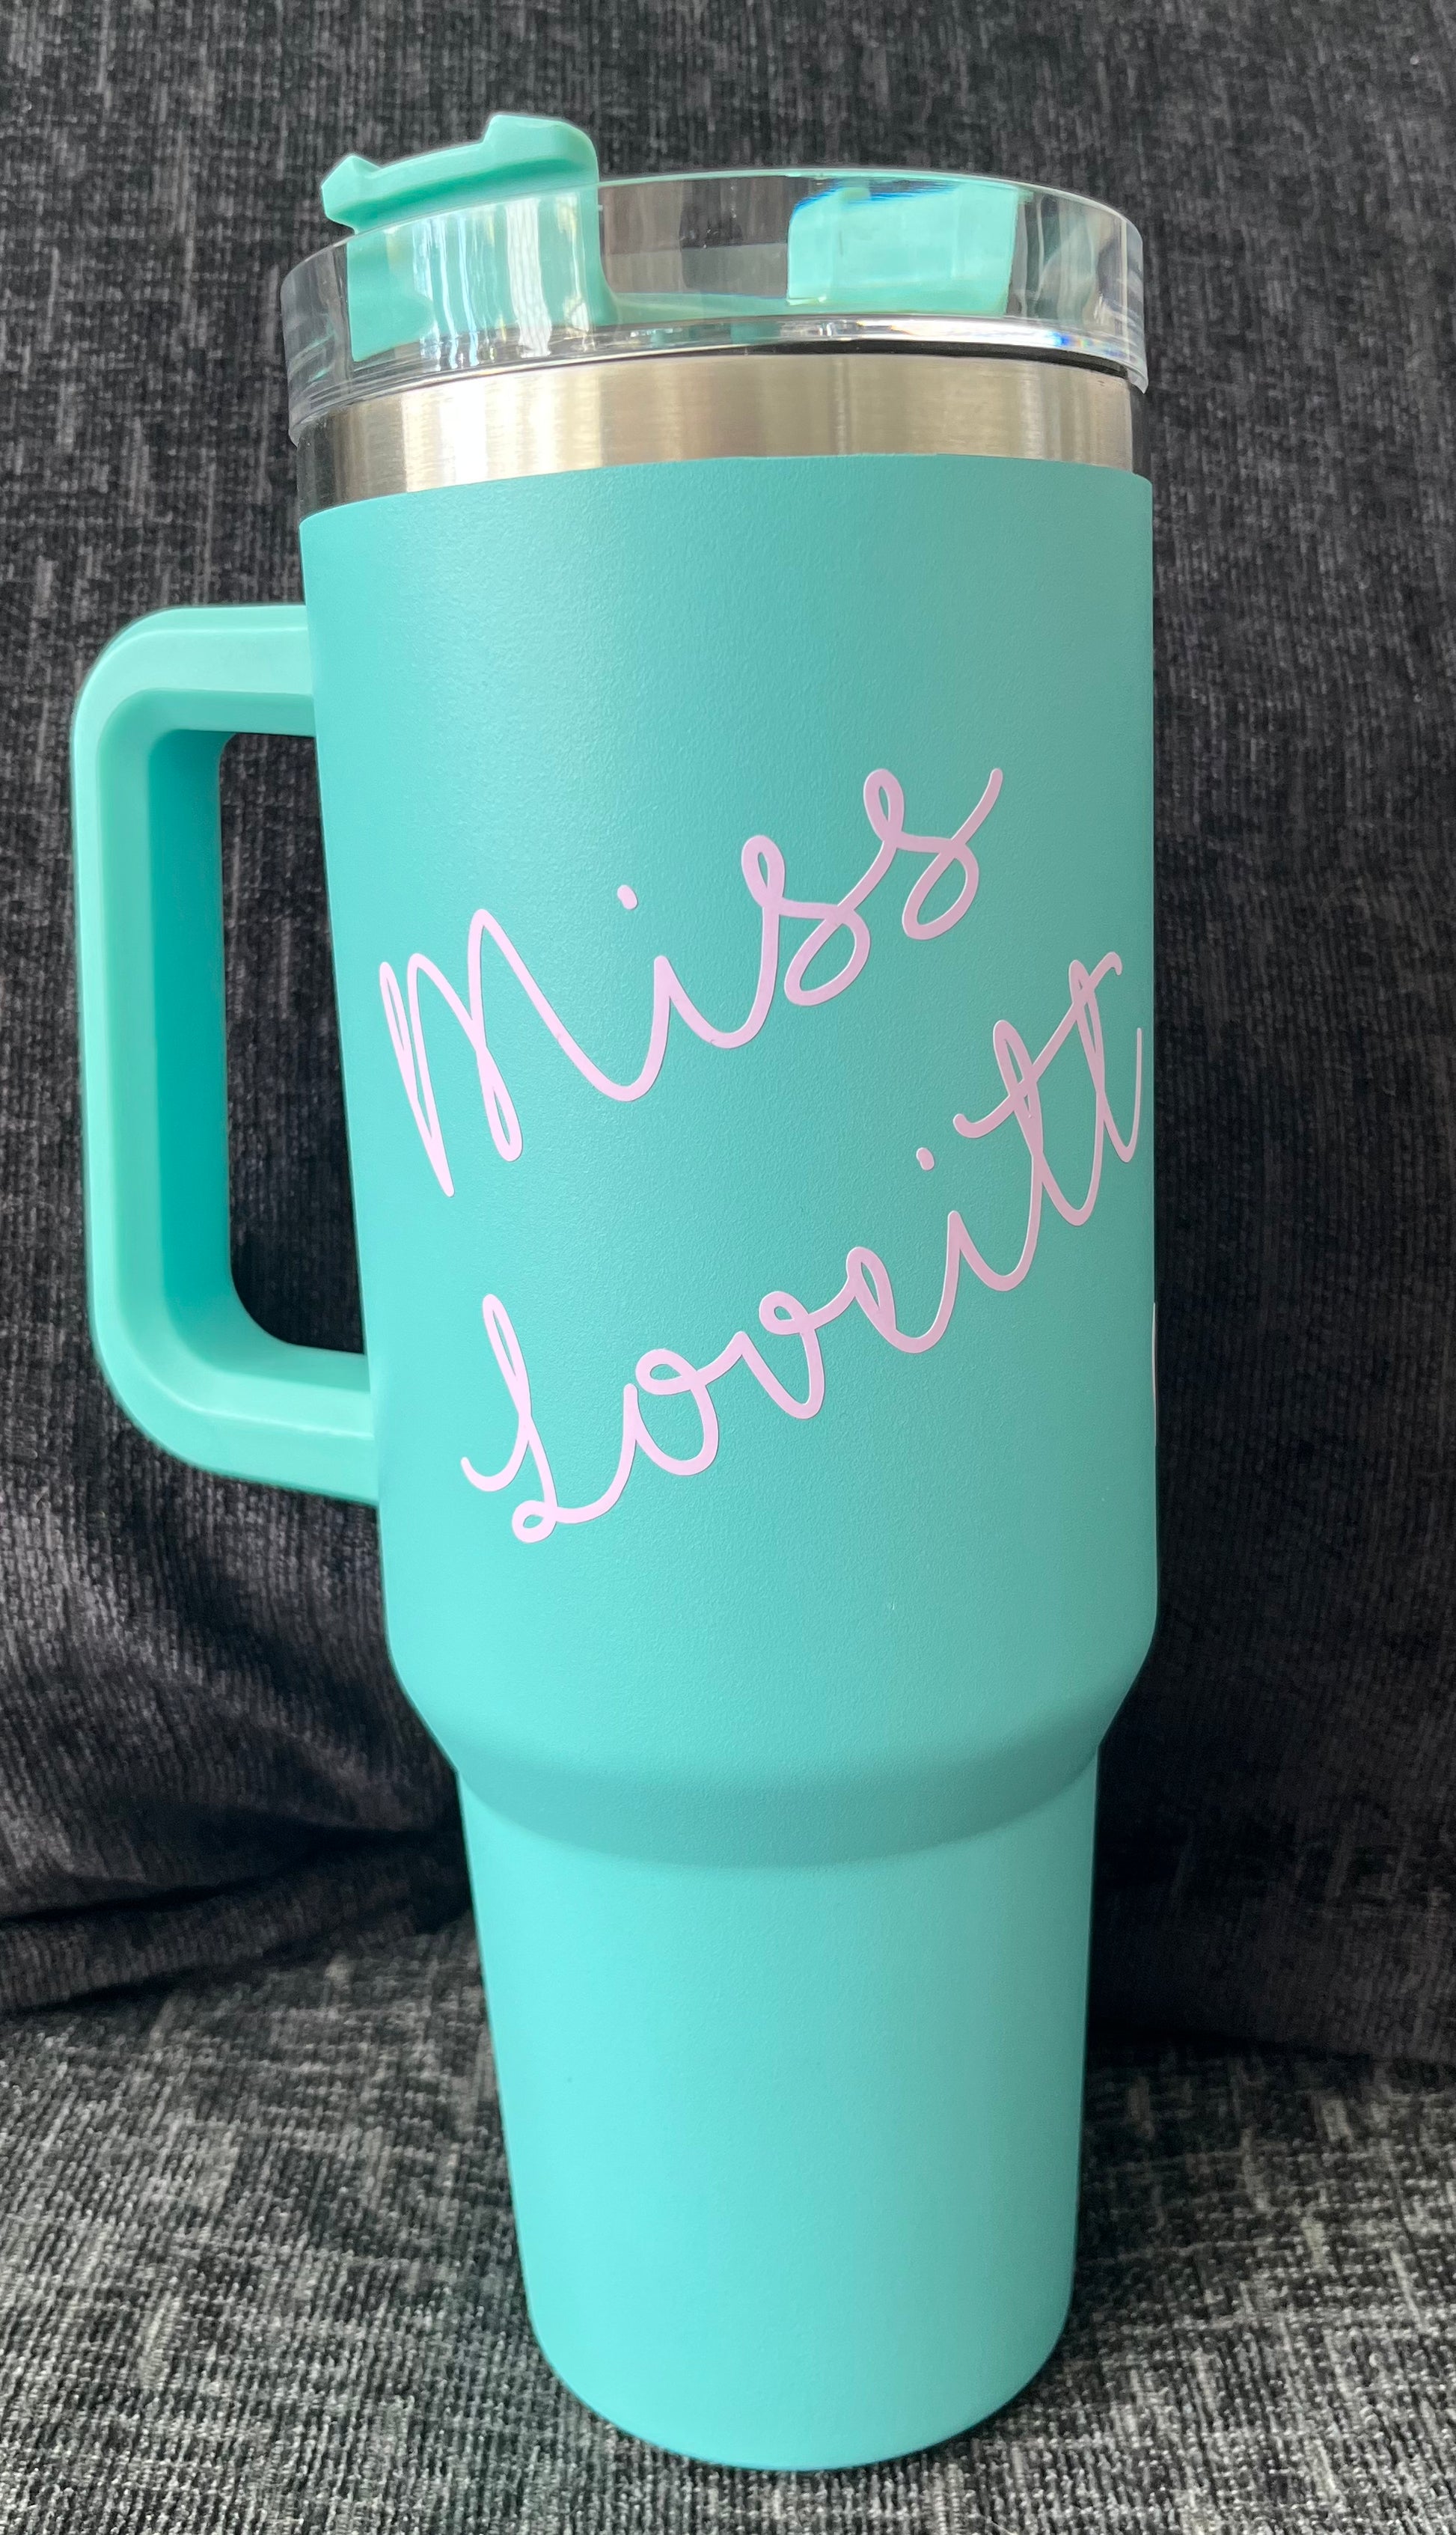 LouisG 40 OZ Travel Tumbler with Handle - Teal